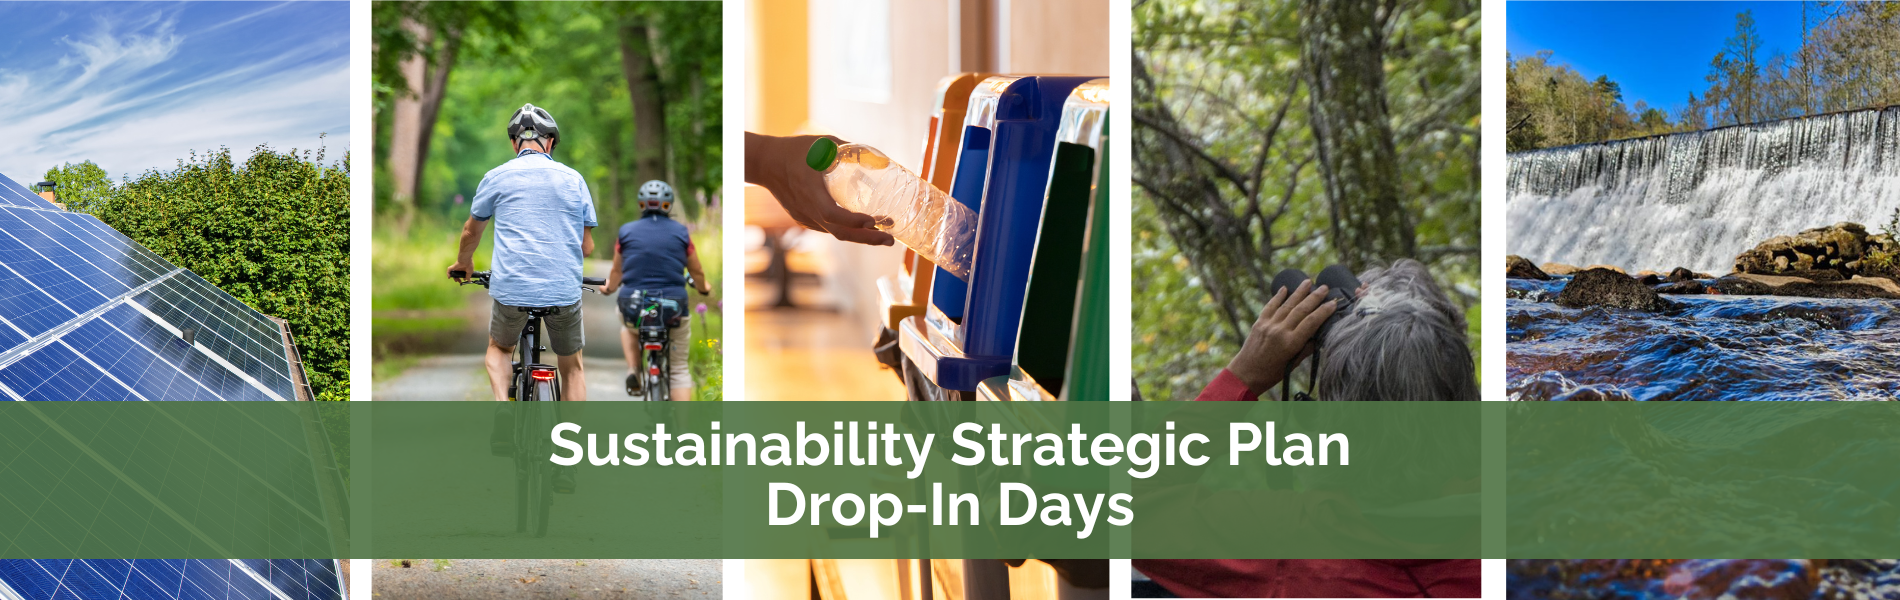 Sustainability Strategic Plan Drop-In Day Graphic